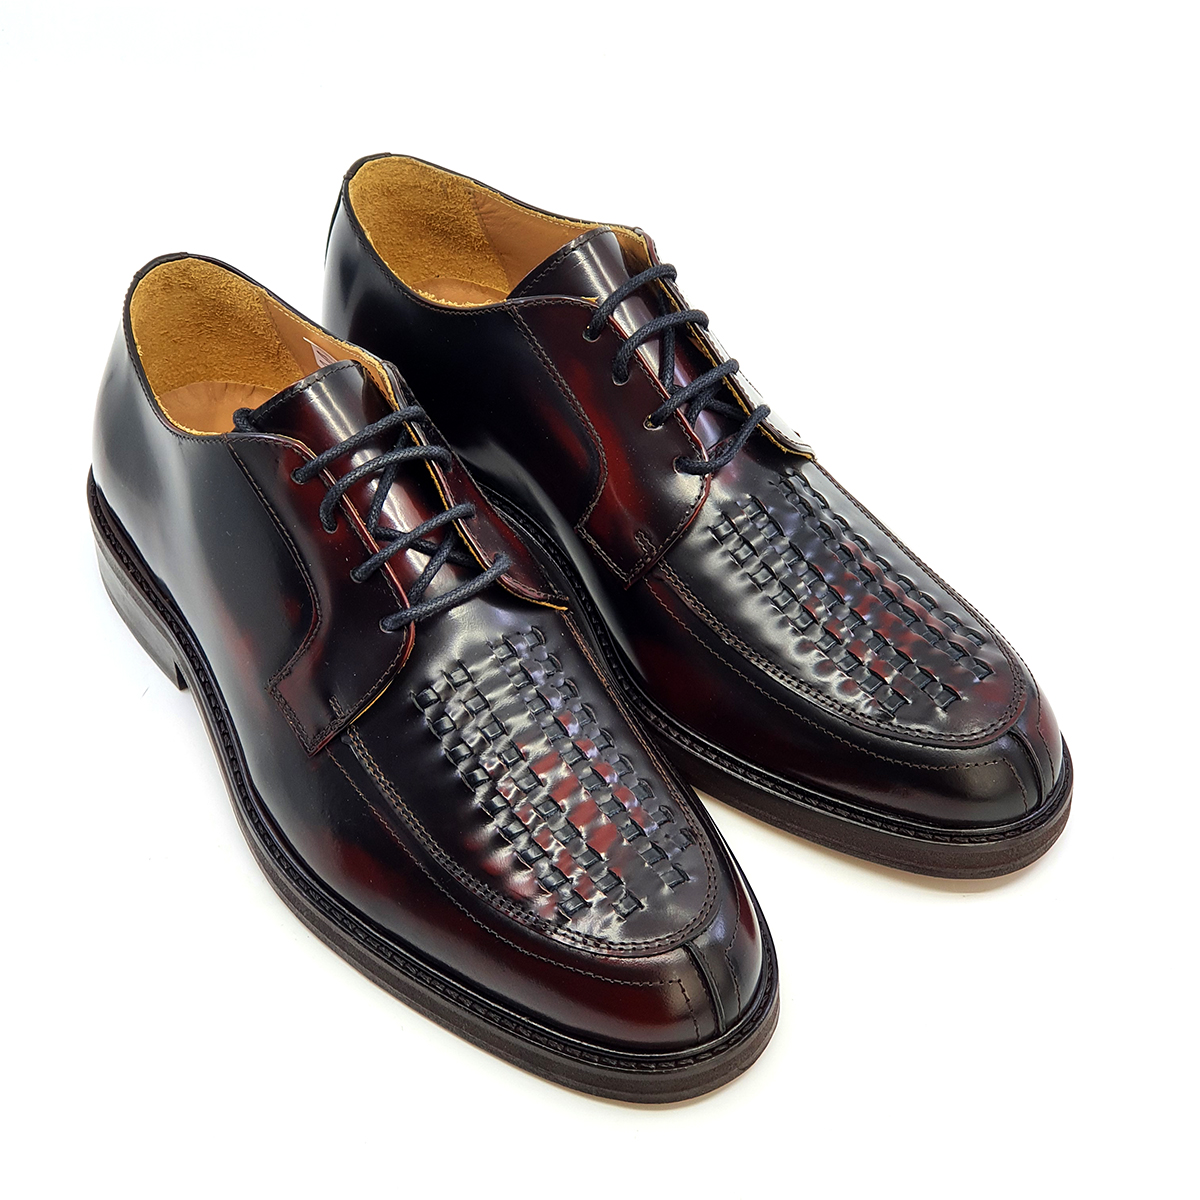 The “JA’s” Shoes Weave Lace Ups In Oxblood – Hard Mod Suedehead ...